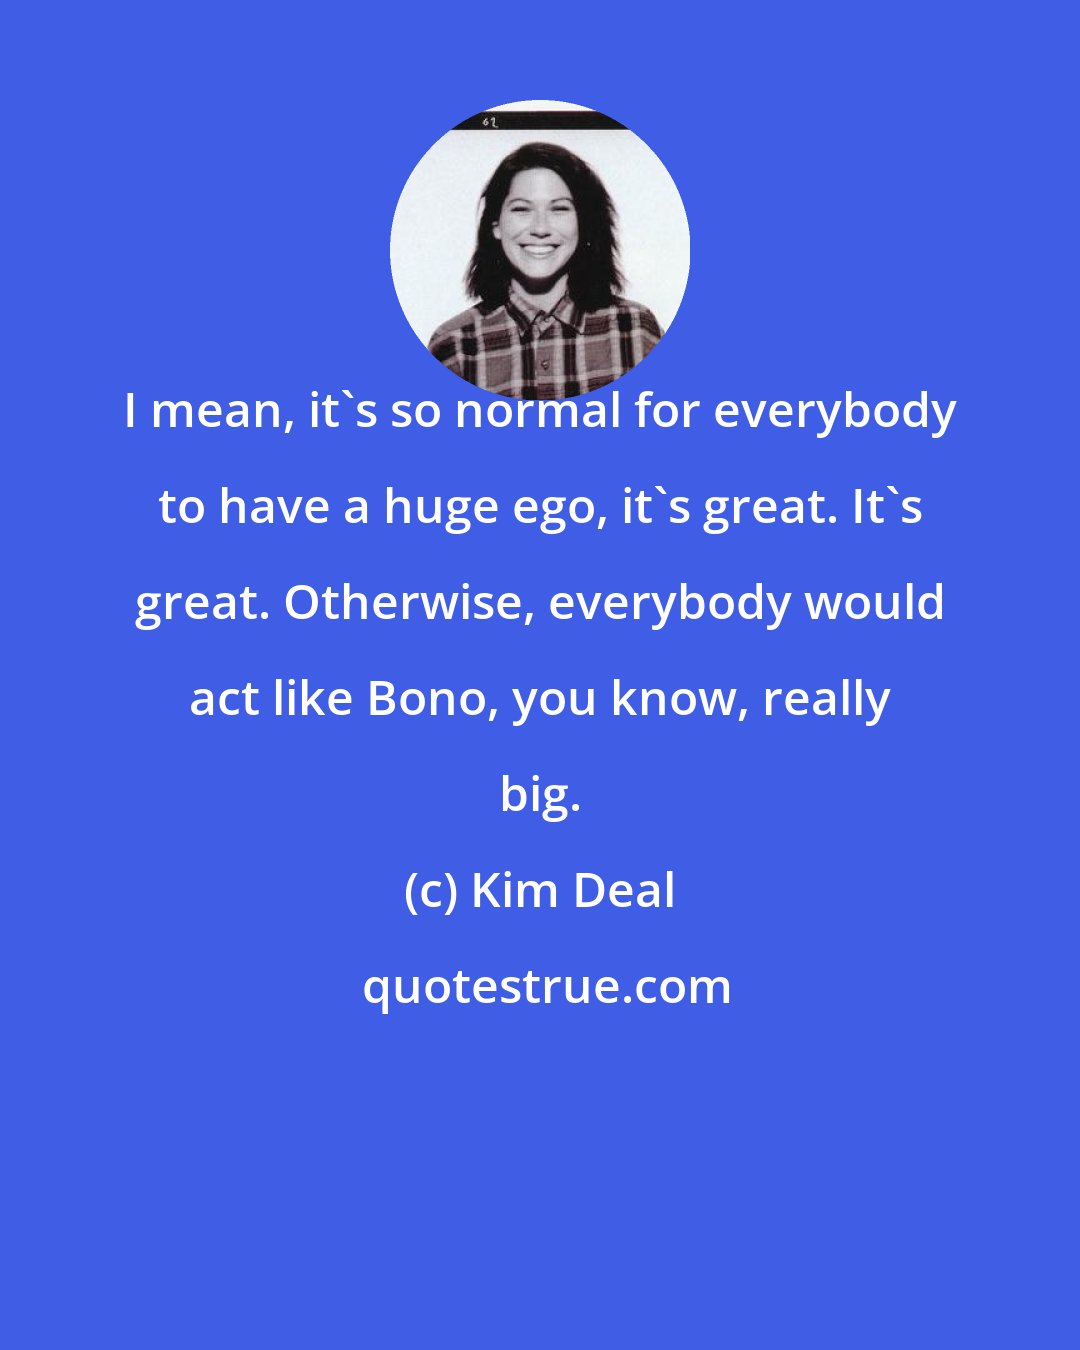 Kim Deal: I mean, it's so normal for everybody to have a huge ego, it's great. It's great. Otherwise, everybody would act like Bono, you know, really big.